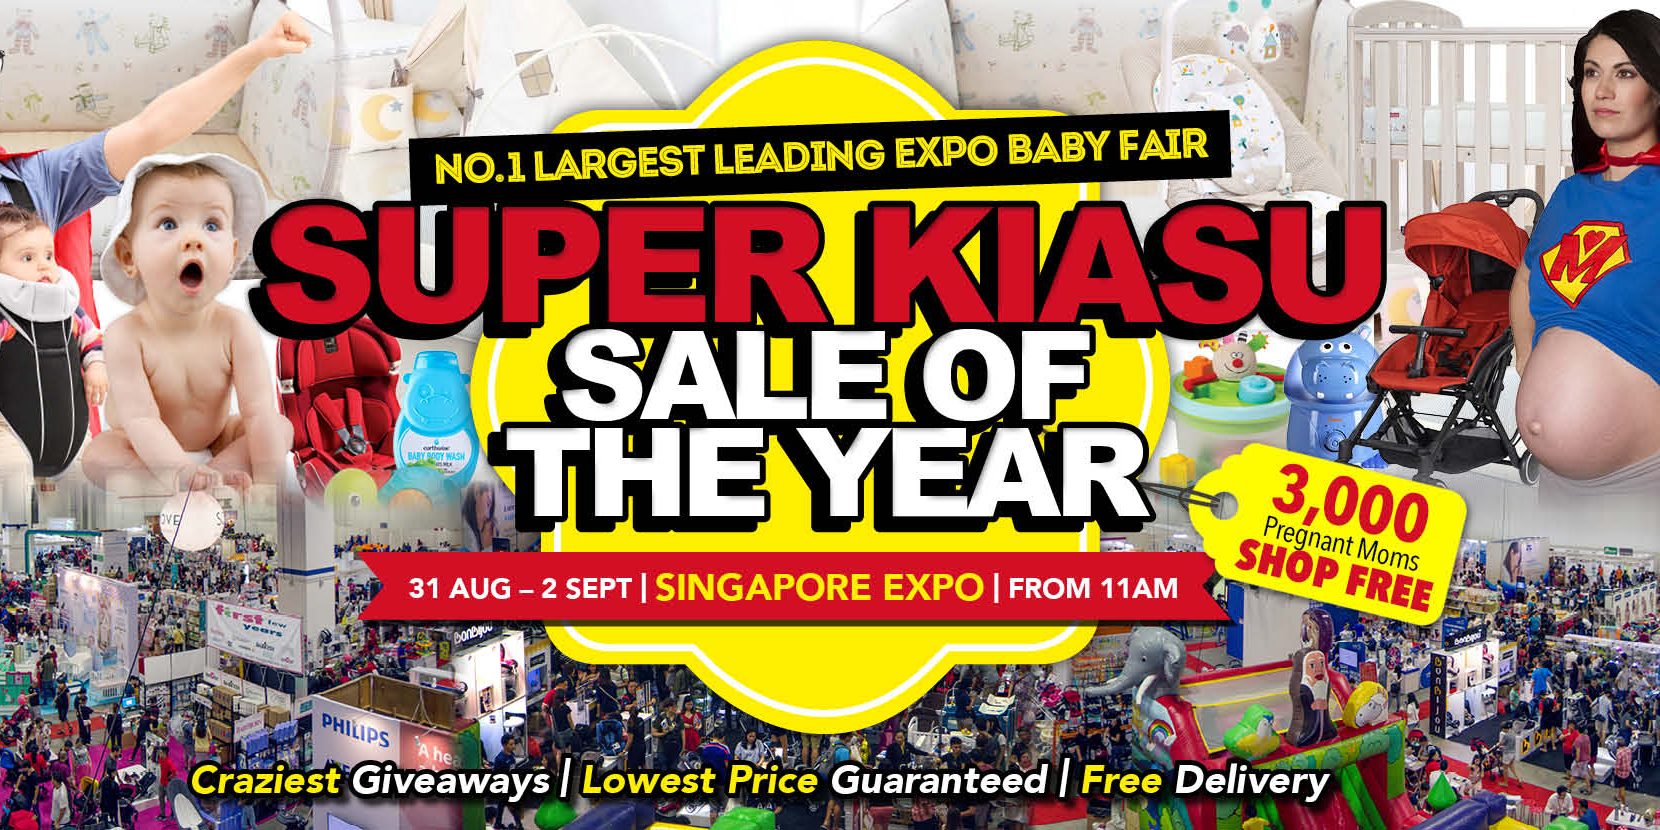 SuperMom Singapore No. 1 Largest Leading Baby Fair Up to 90% Off Promotion 31 Aug – 2 Sep 2018